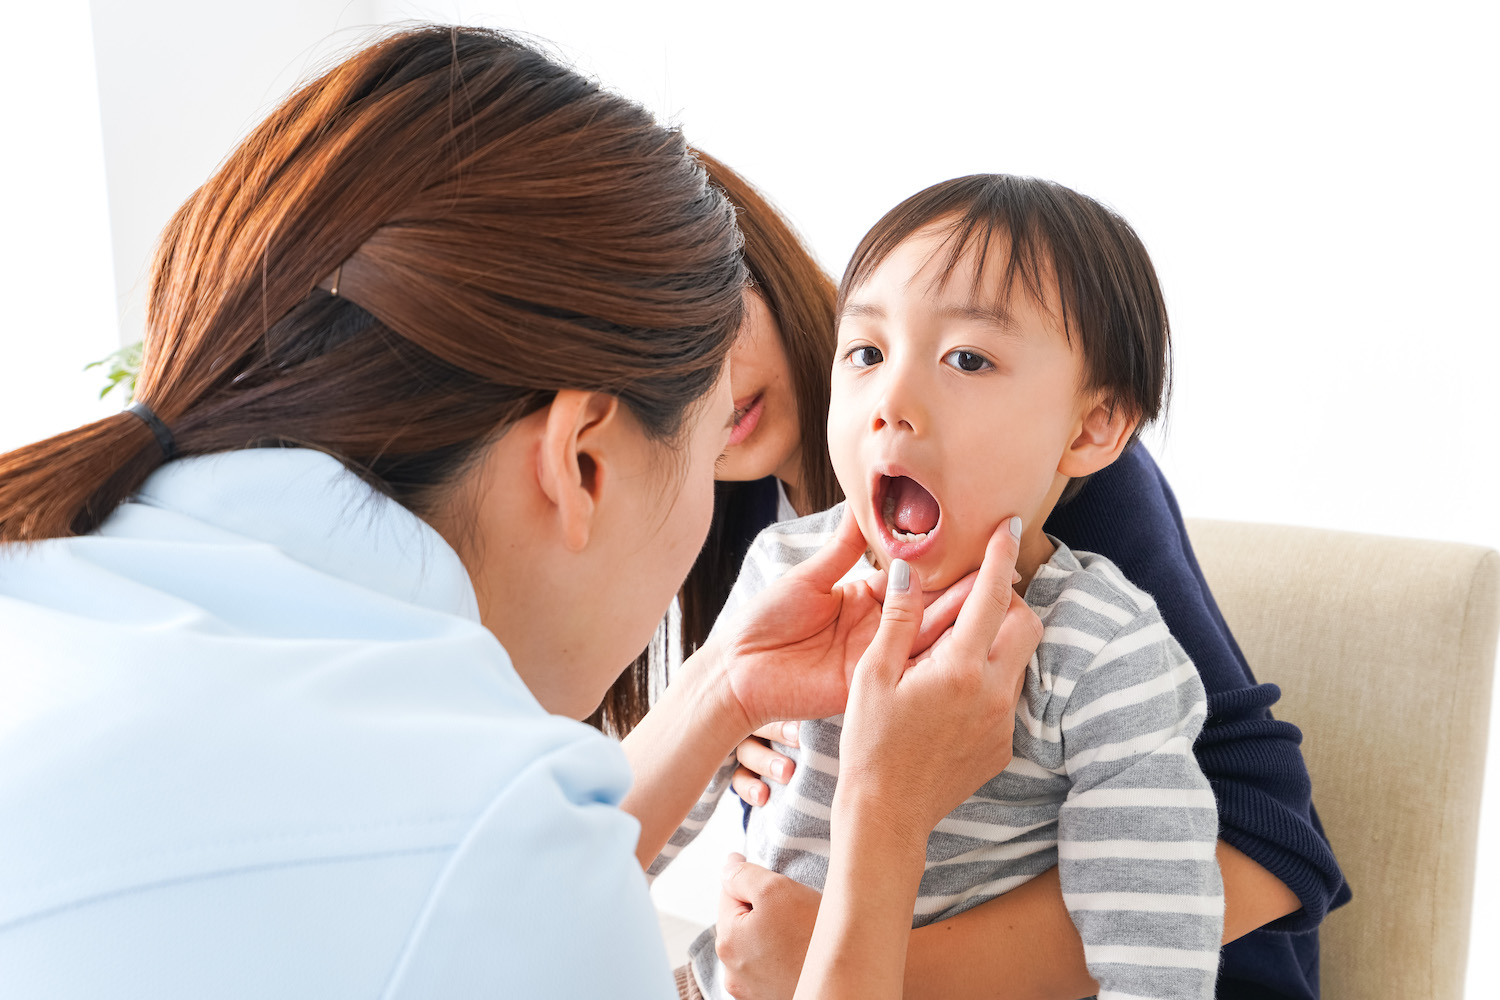 Children's dentist looks into a child's mouth at sealants after applying a fluoride treatment